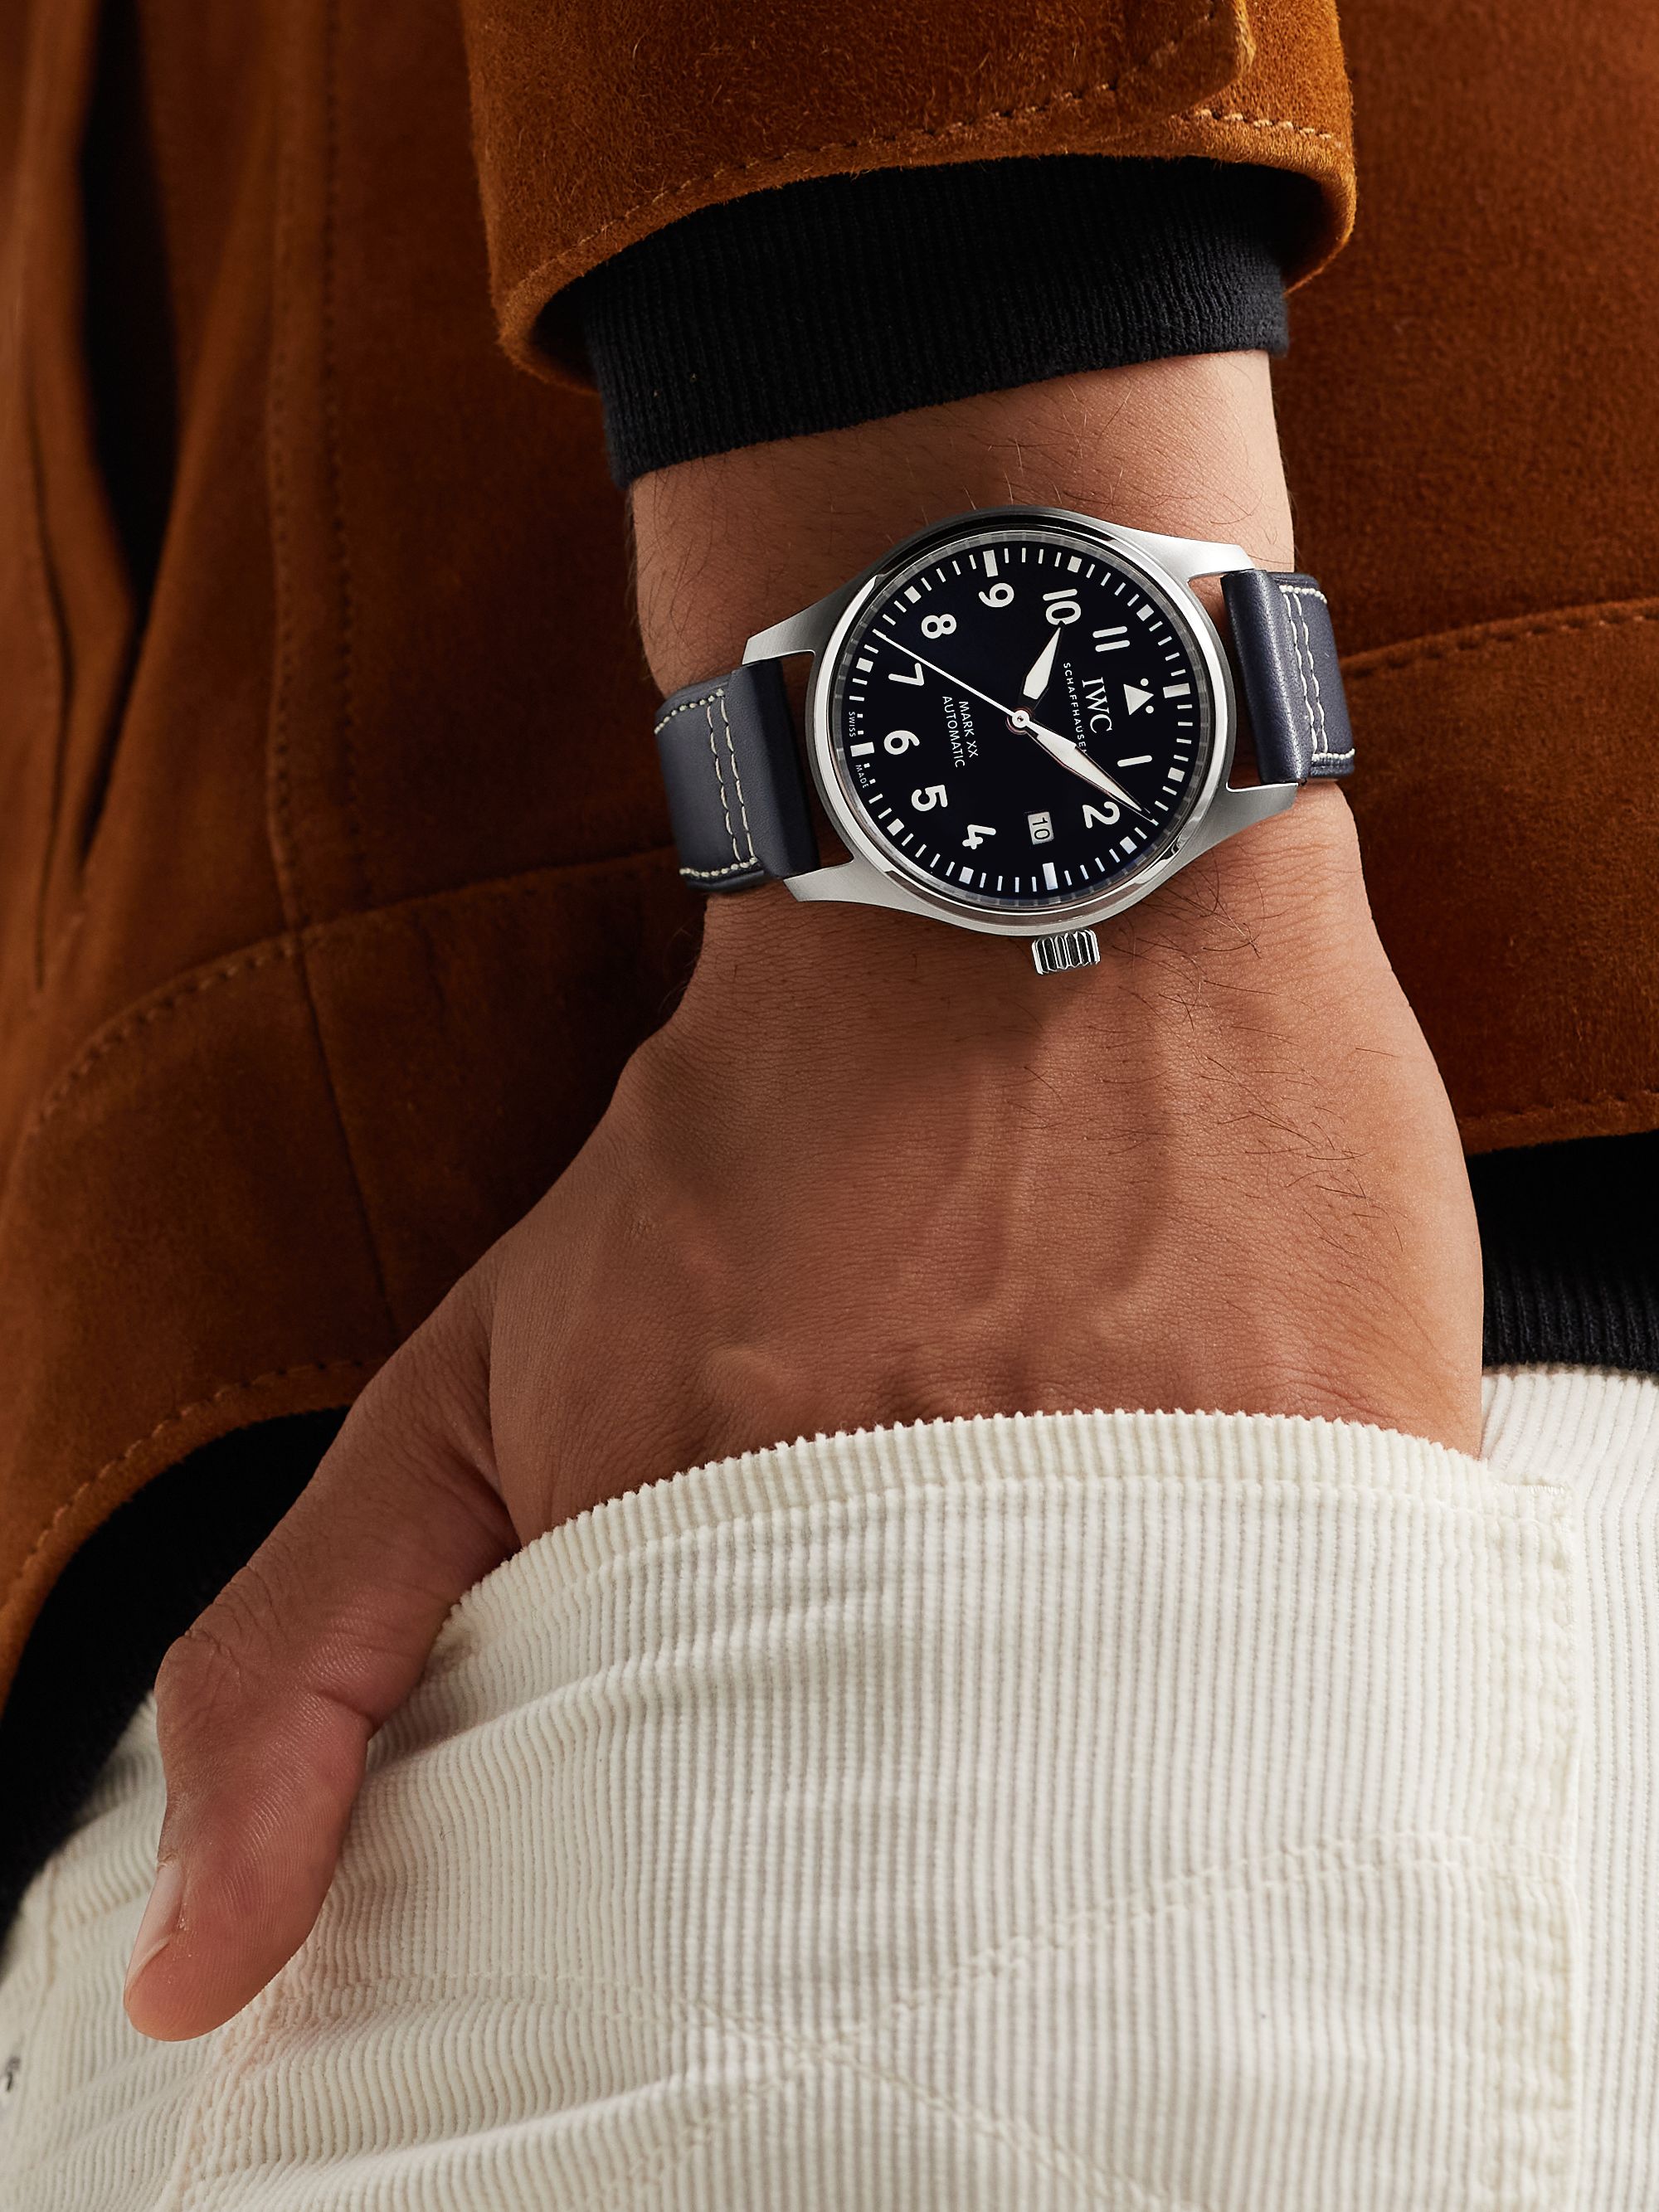 IWC SCHAFFHAUSEN Pilot's Mark XX Automatic 40mm Stainless Steel and Leather Watch, Ref. No. IWIW328203